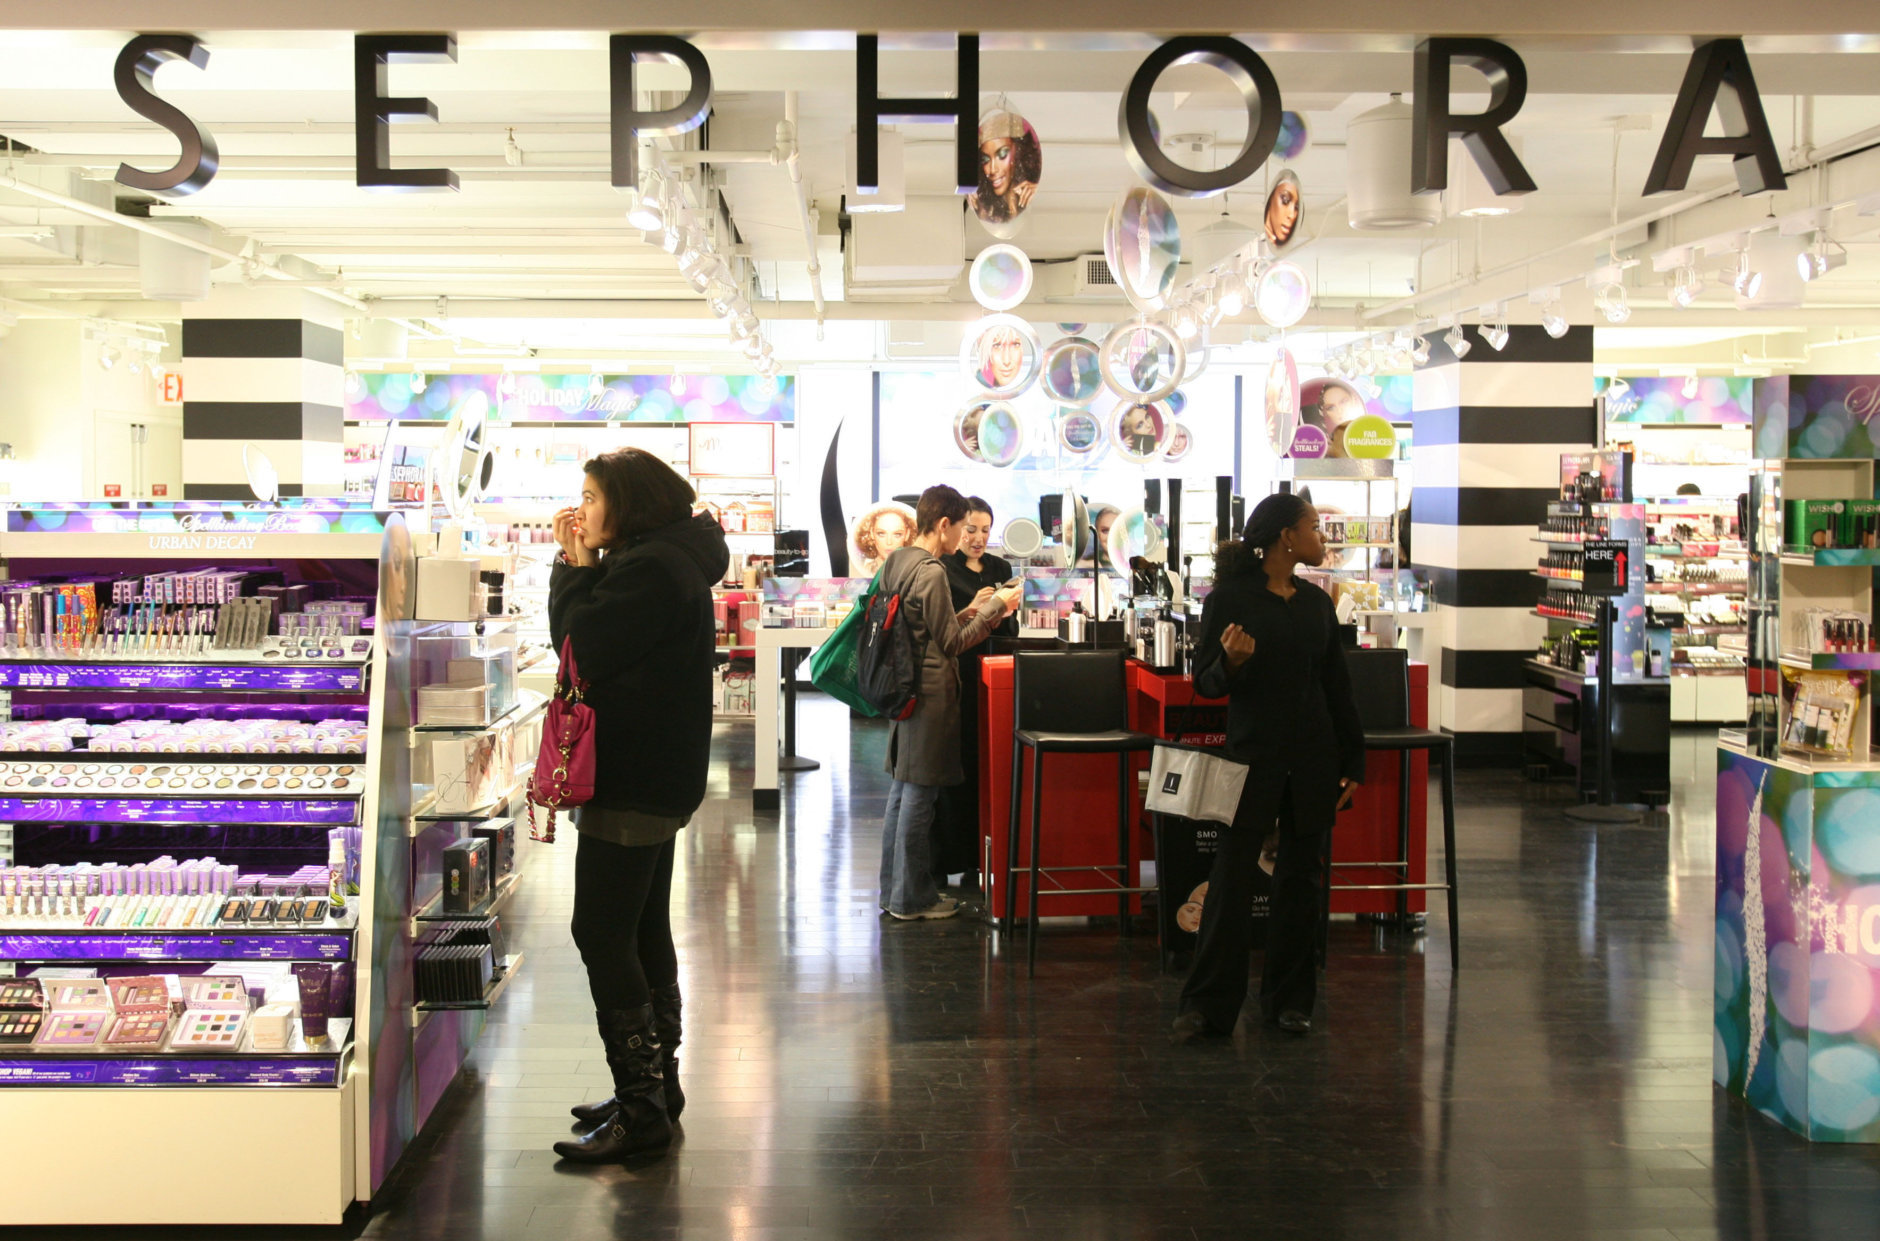 In this Friday, Oct. 23, 2009 photo, shoppers  visit a Sephora boutique inside a J.C. Penney store in New York. (AP Photo/Mark Lennihan)